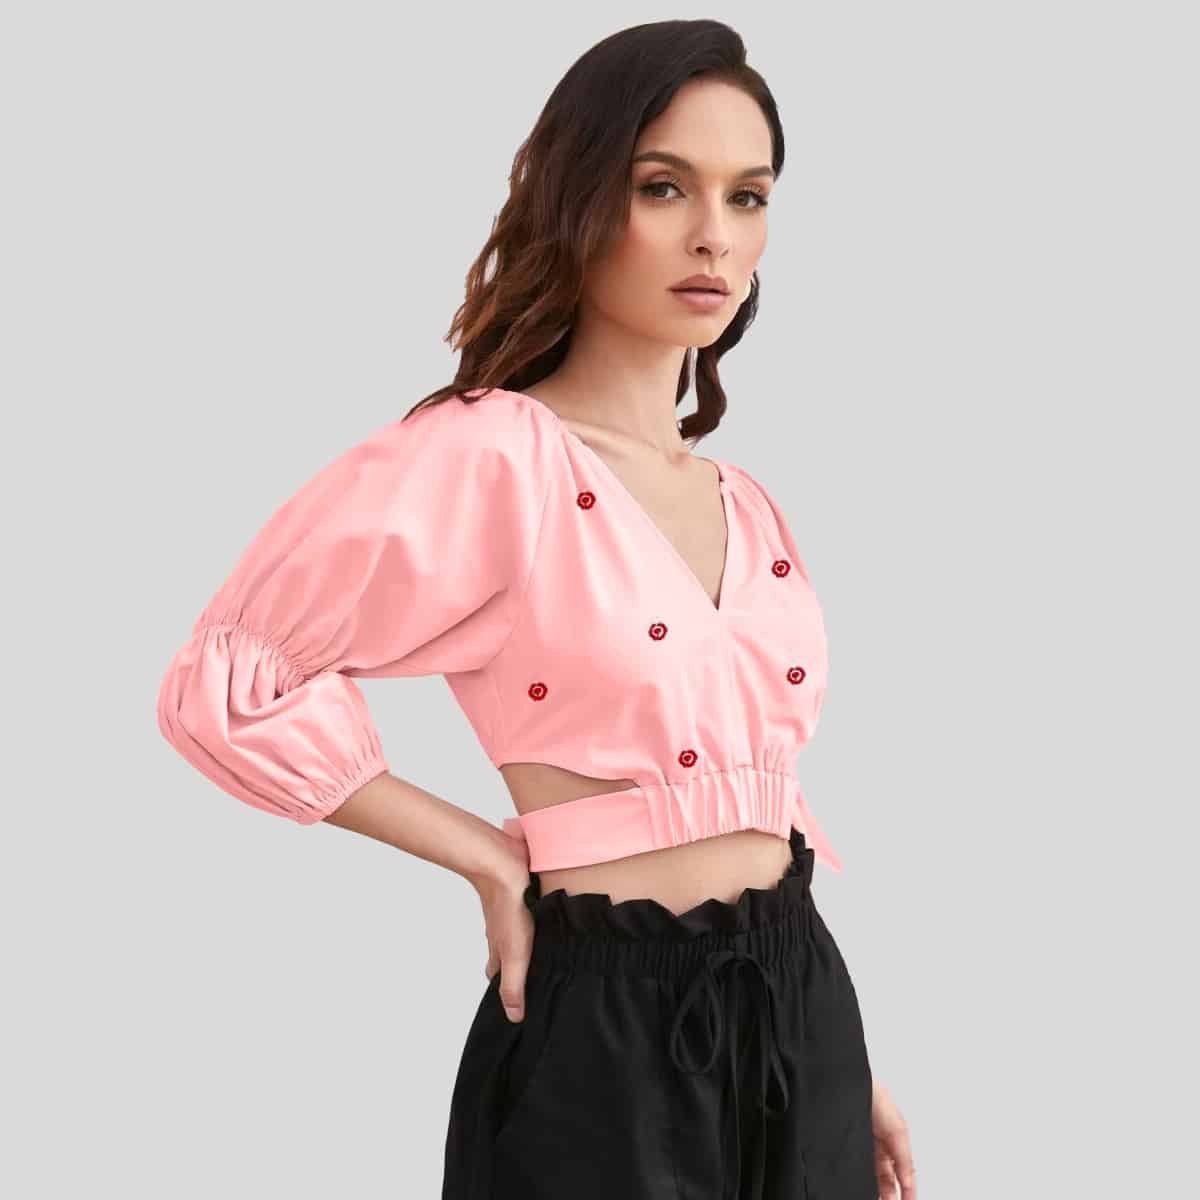 Baby Pink Gather Sleeve Notch Neck Tie Back Crop with Print Top-RCT057